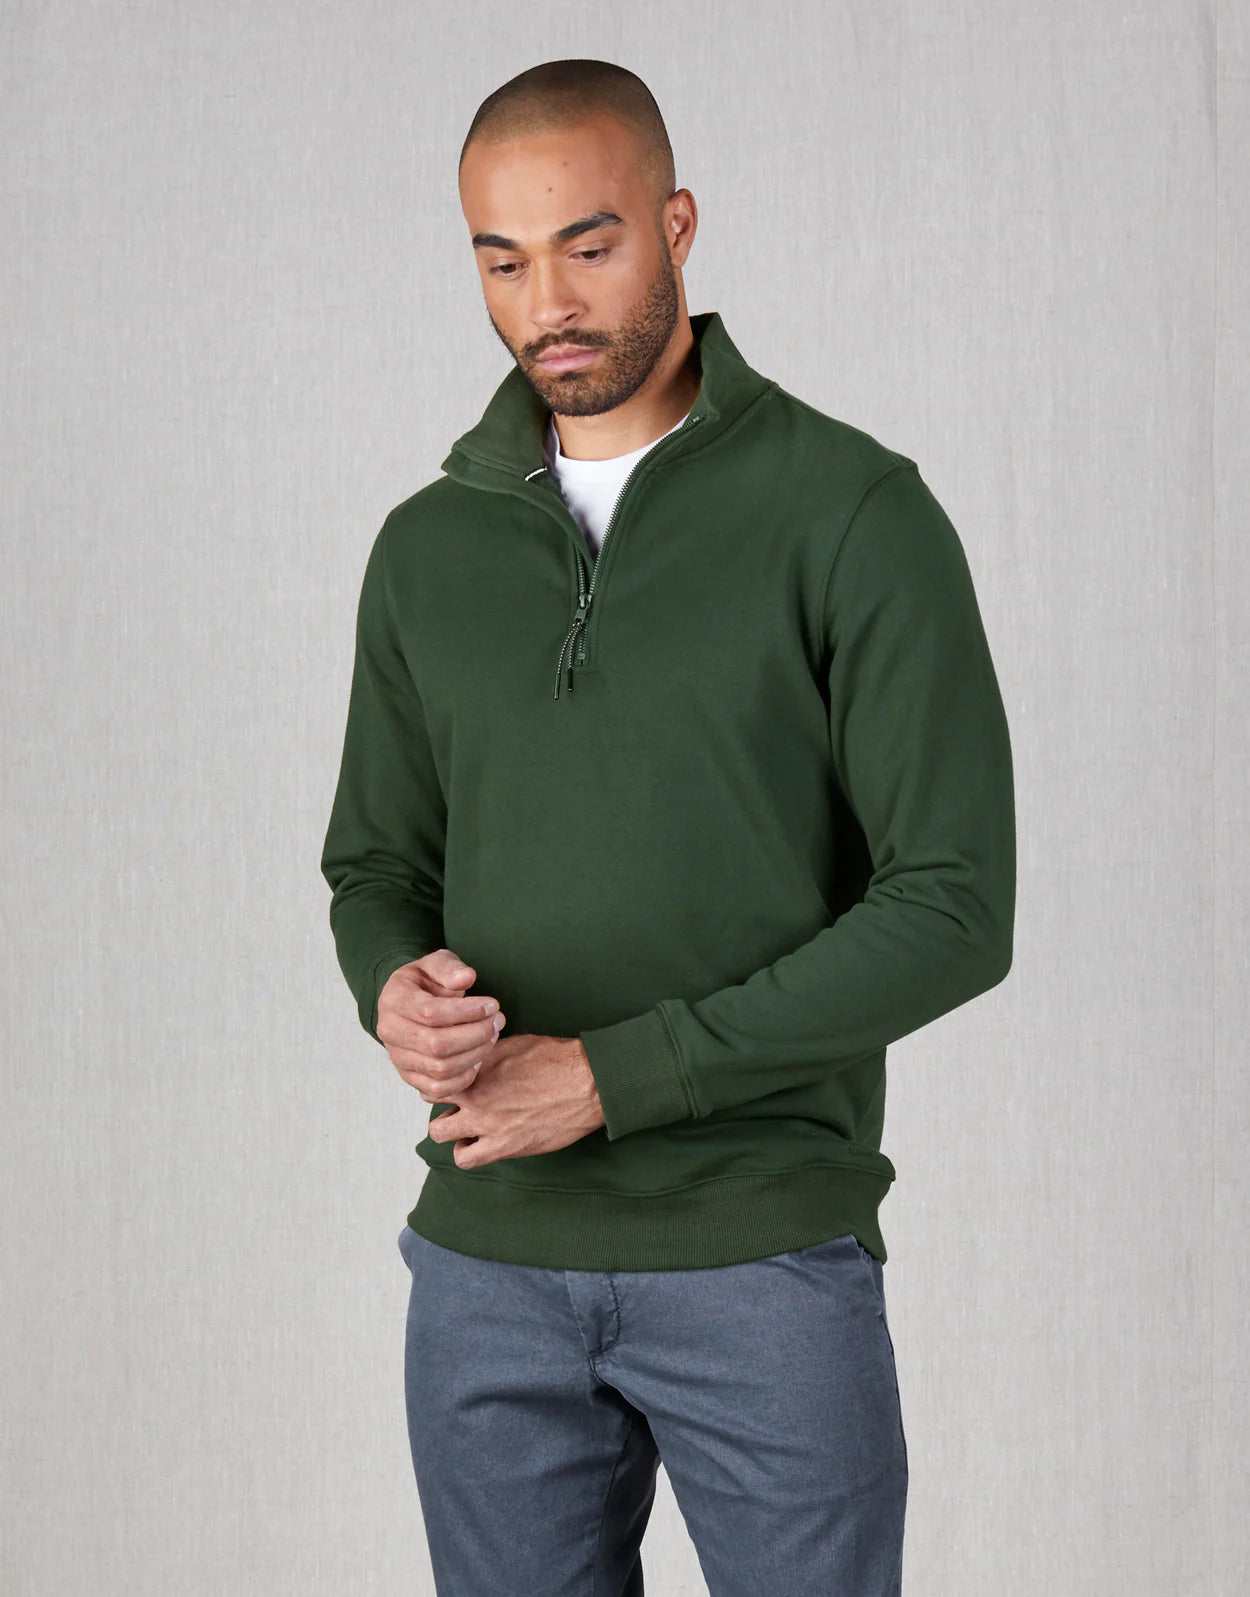 Rembrandt - Champ 1/4 Zip Sweater - Green or Navy